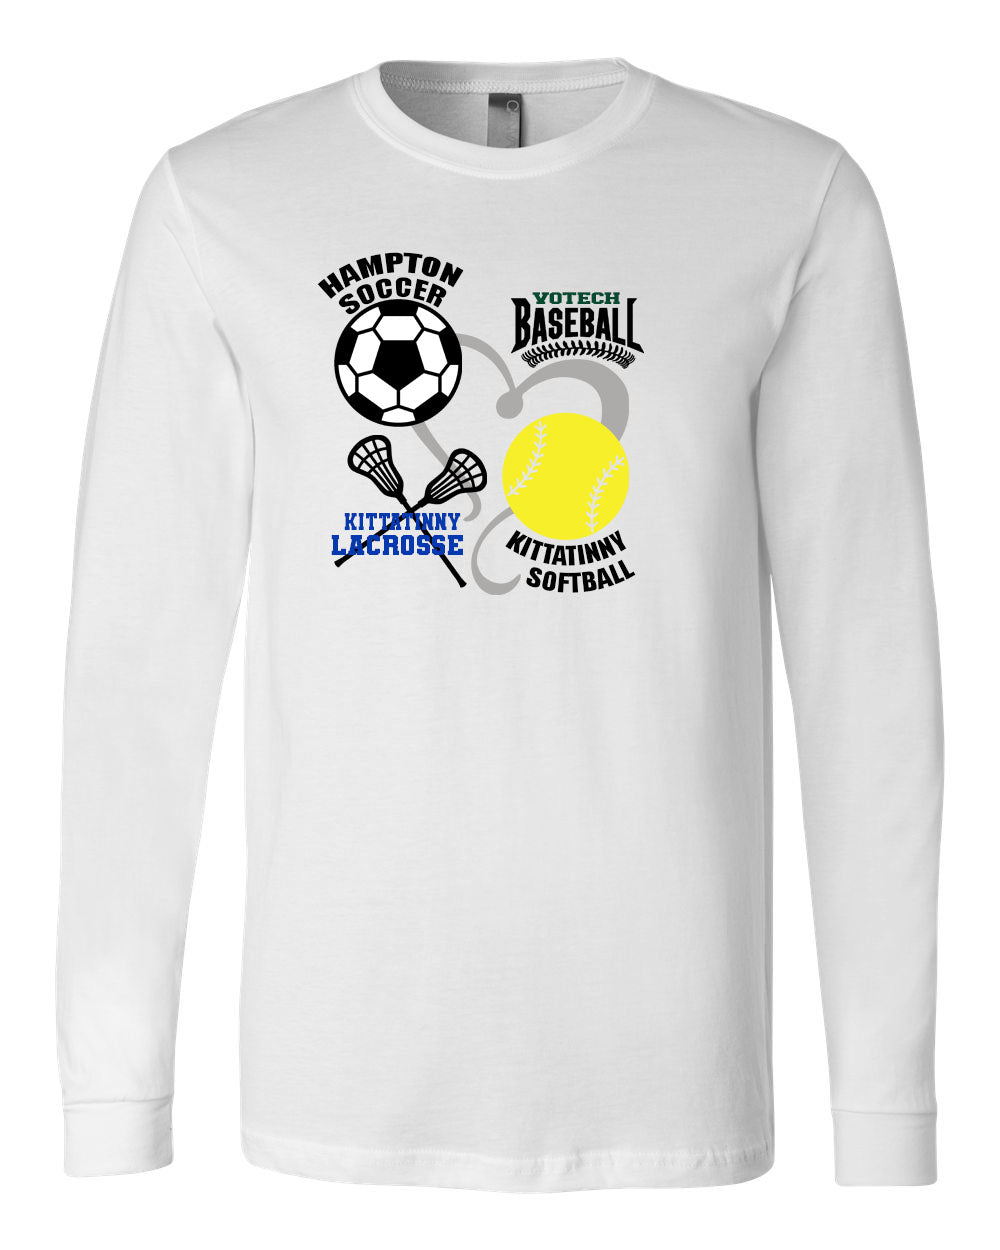 Kids in all sports Long Sleeve Shirt